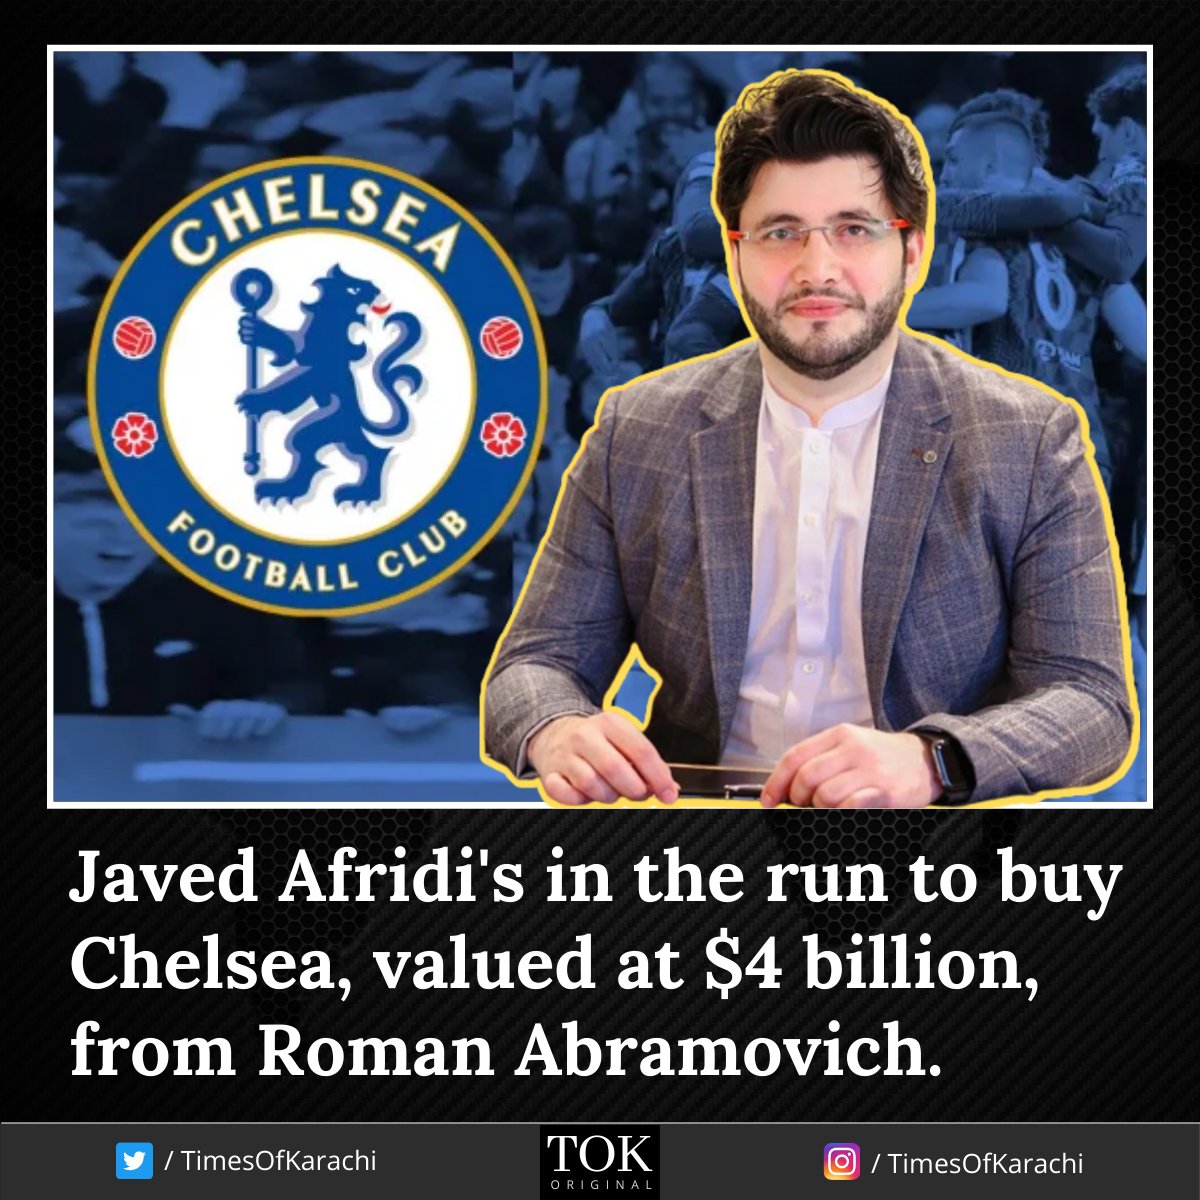 #Pakistan’s businessmen @JAfridi10's in the run to buy #Chelsea that’s been valued at $4 billion from #RomanAbramovich. #JavedAfridi has stakes in #Haier and #MG’s local units among other businesses.